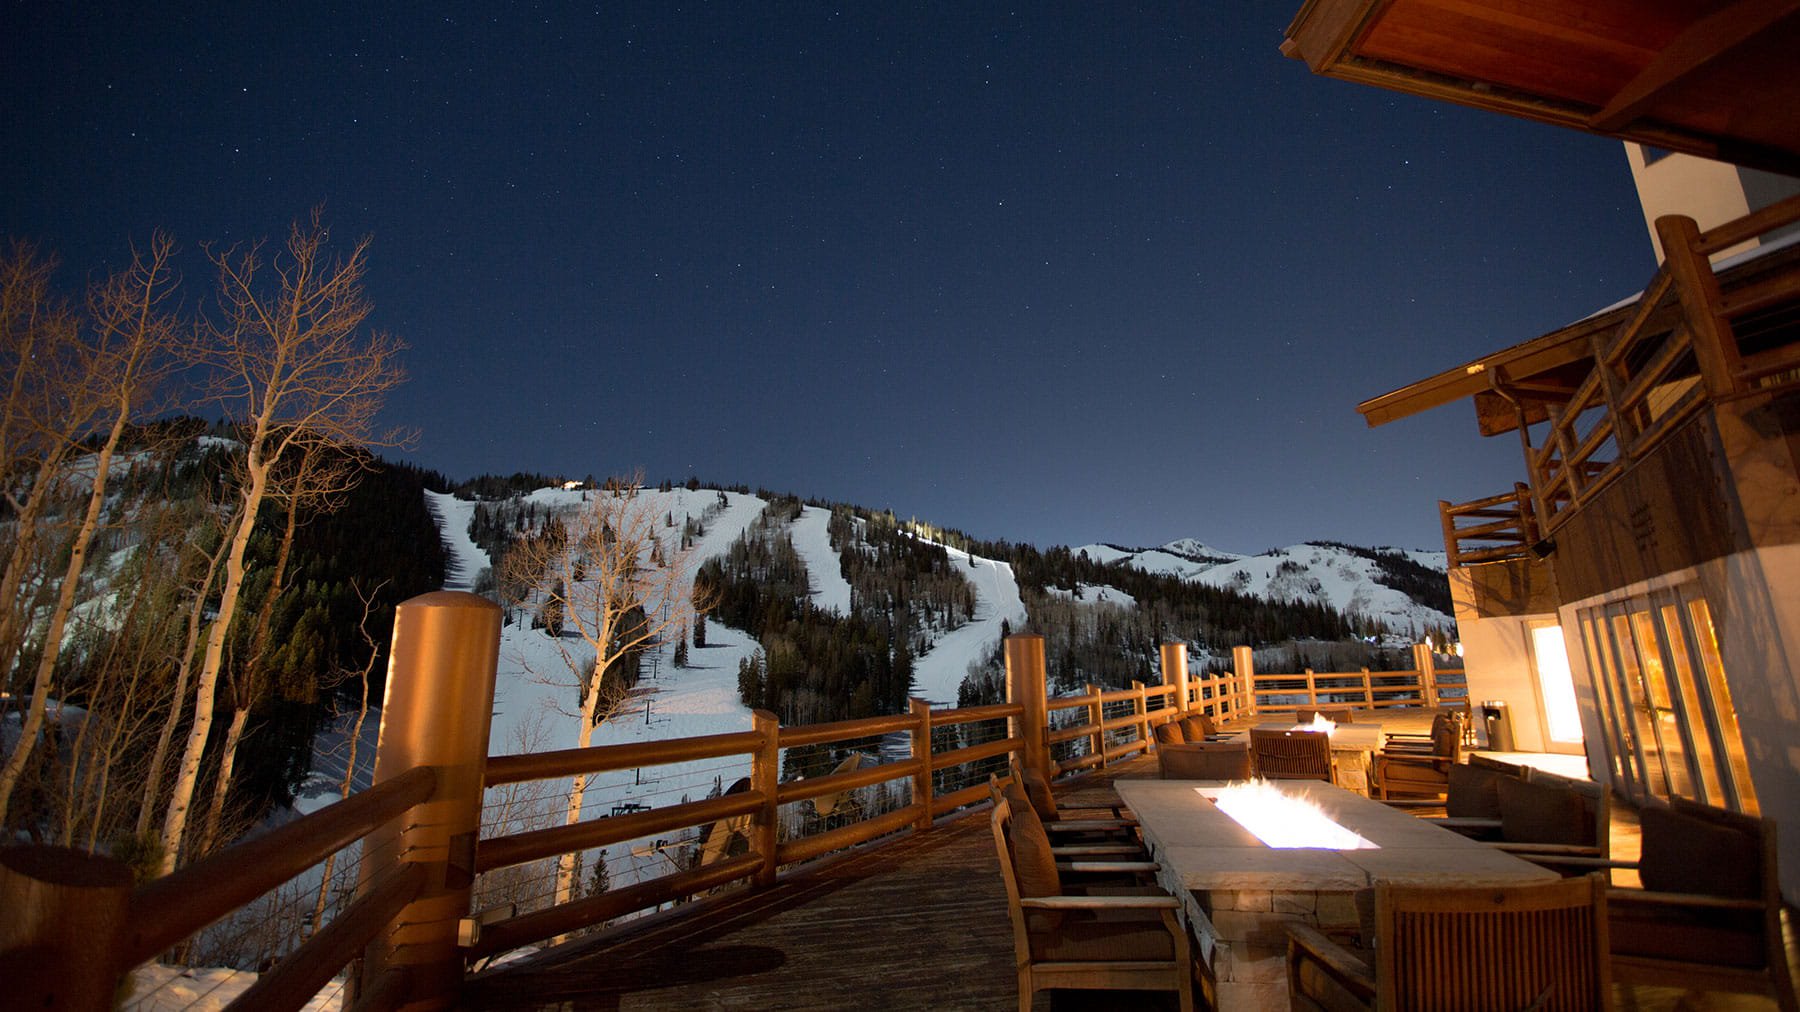 View of the mountains at dusk during winter on Stein Erkisen Lodge deck